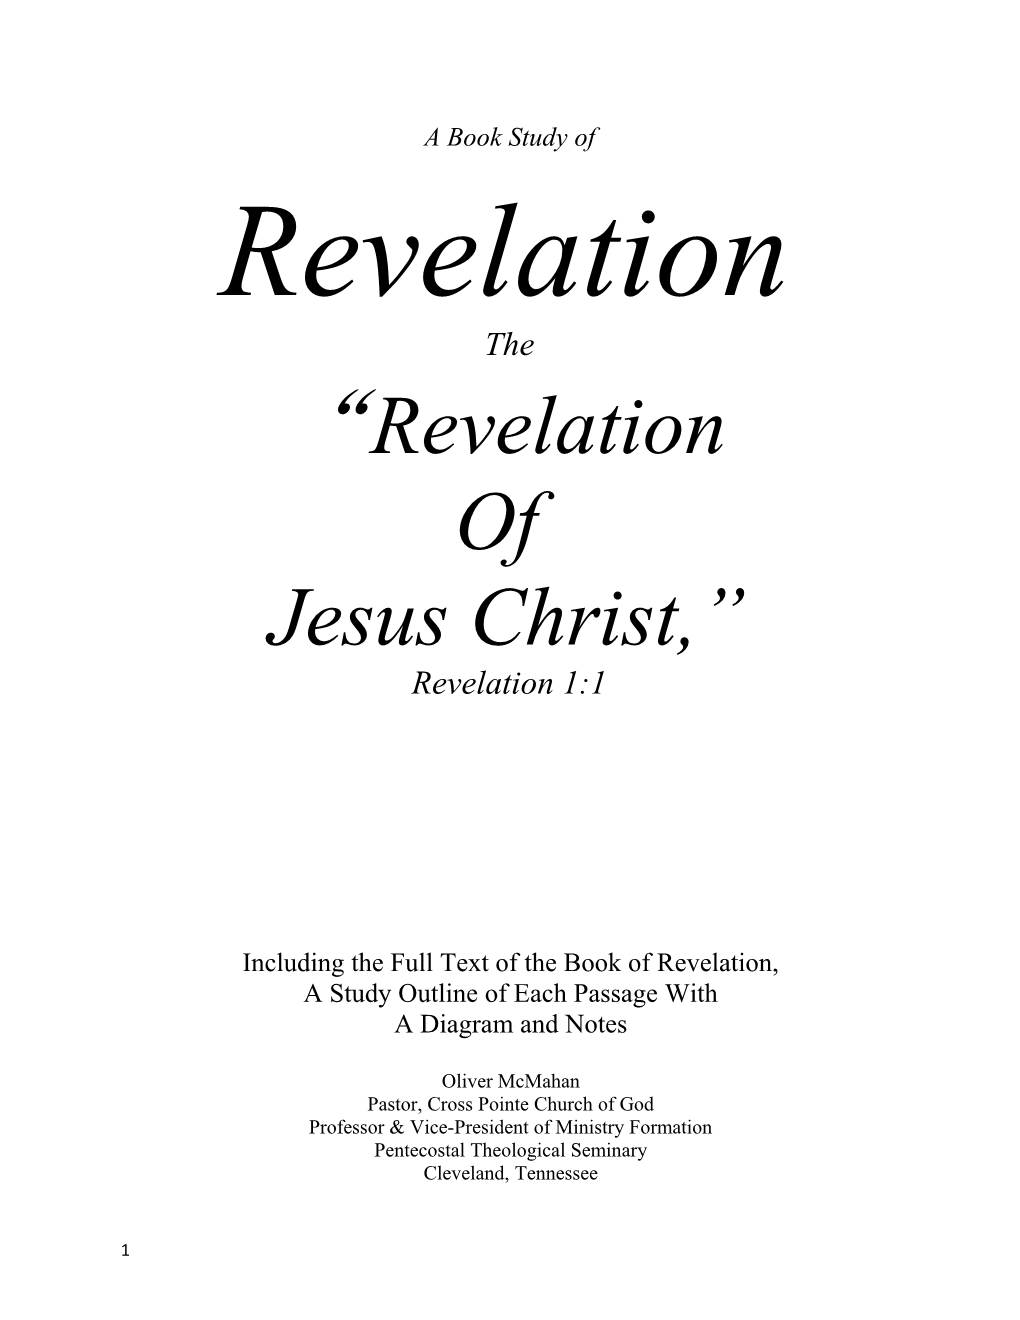 Including the Full Text of the Book of Revelation